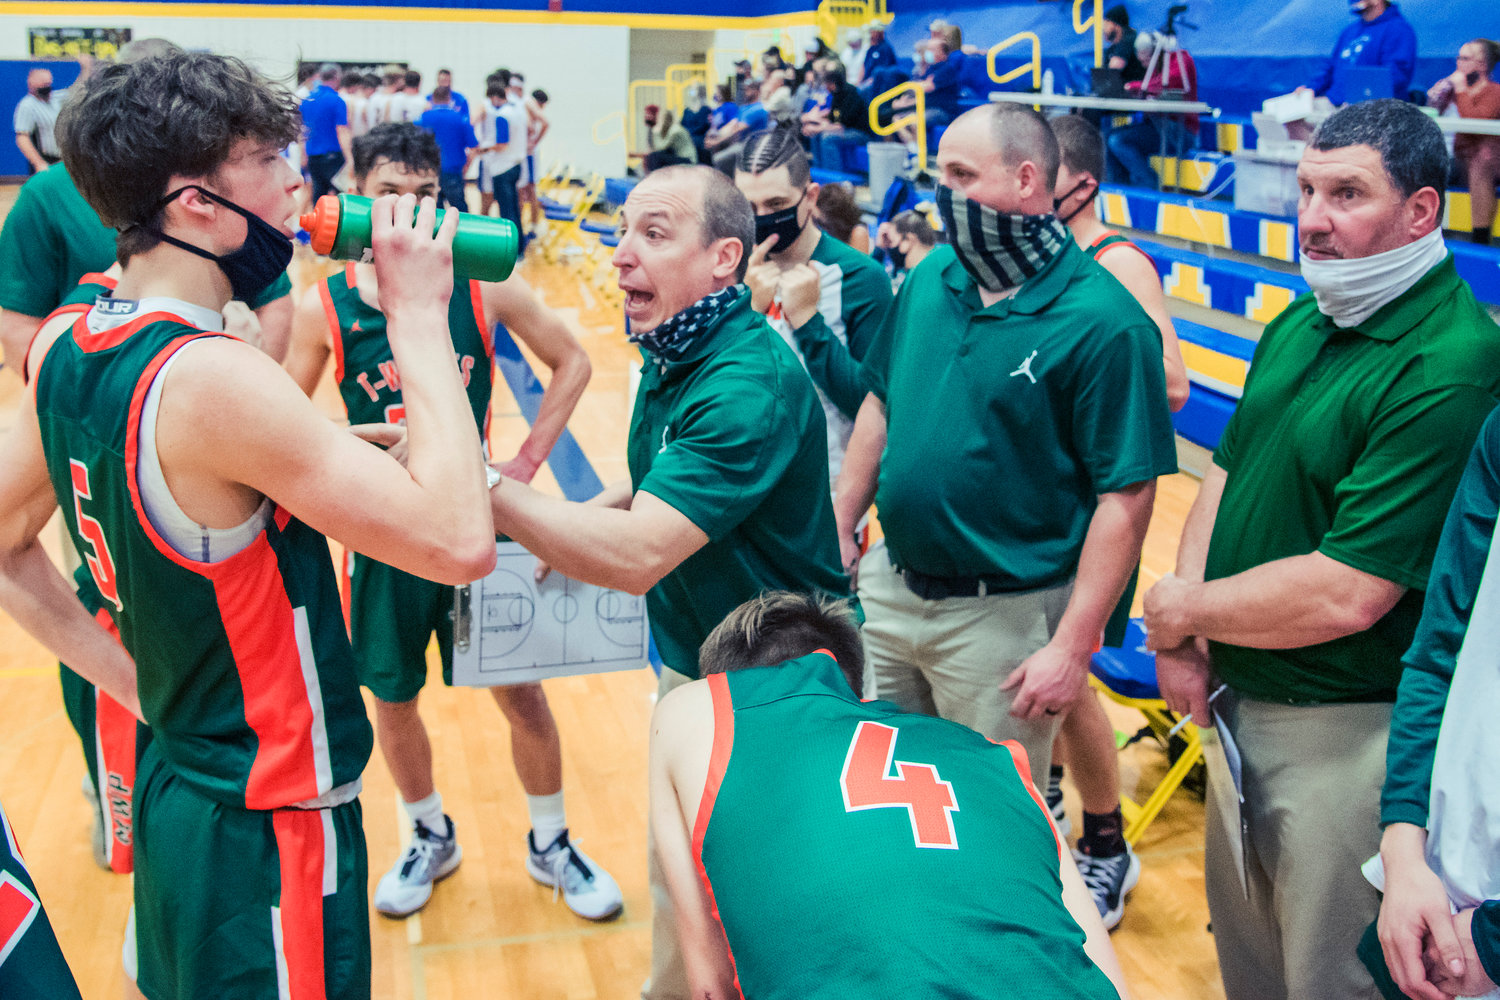 MWP’s Head Coach Chad Cramer talks to players during a game against Adna on Tuesday.